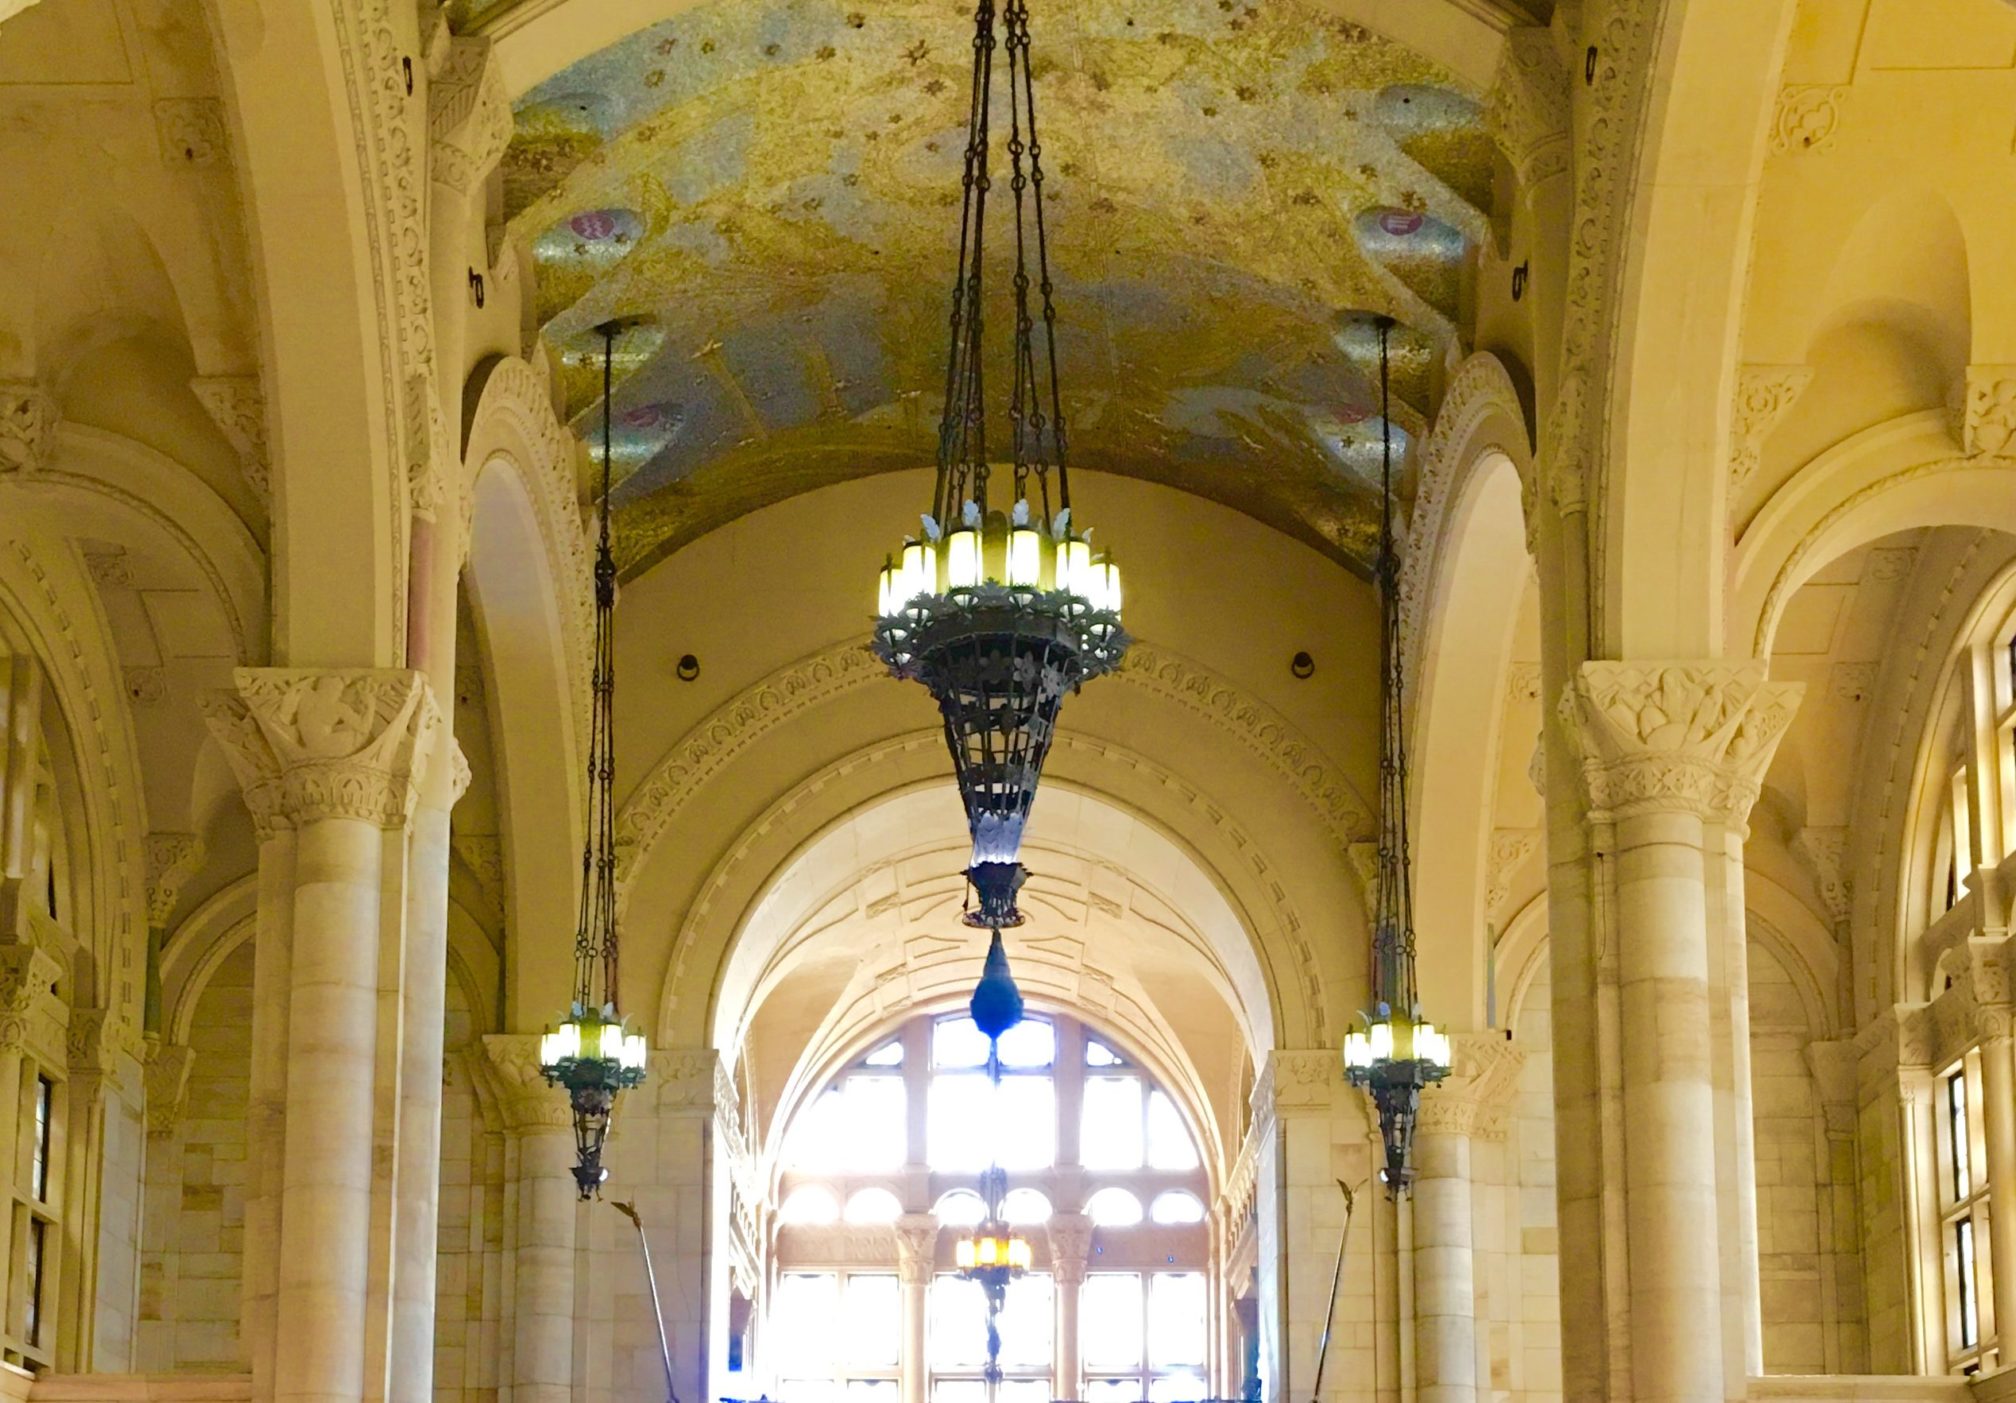 A look at some of the details in the famous banking hall. Eagle file photo by Lore Croghan